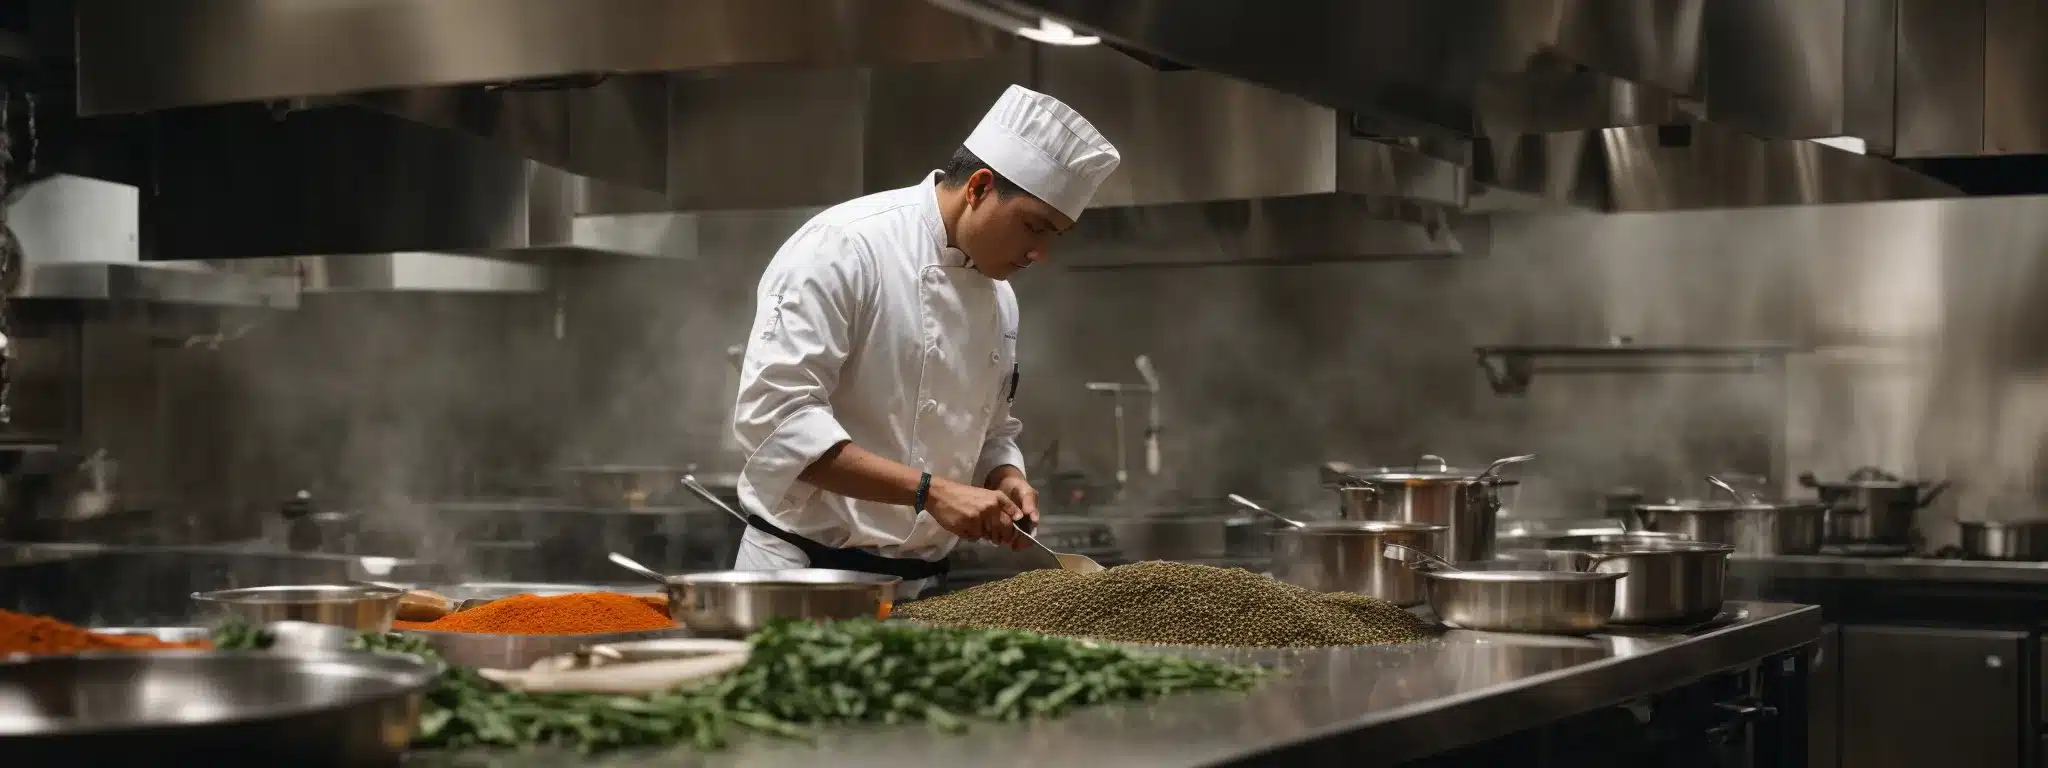 A Chef Expertly Maneuvers Around A Professional Kitchen, Preparing An Elaborate Dish With An Array Of Spices And Ingredients.